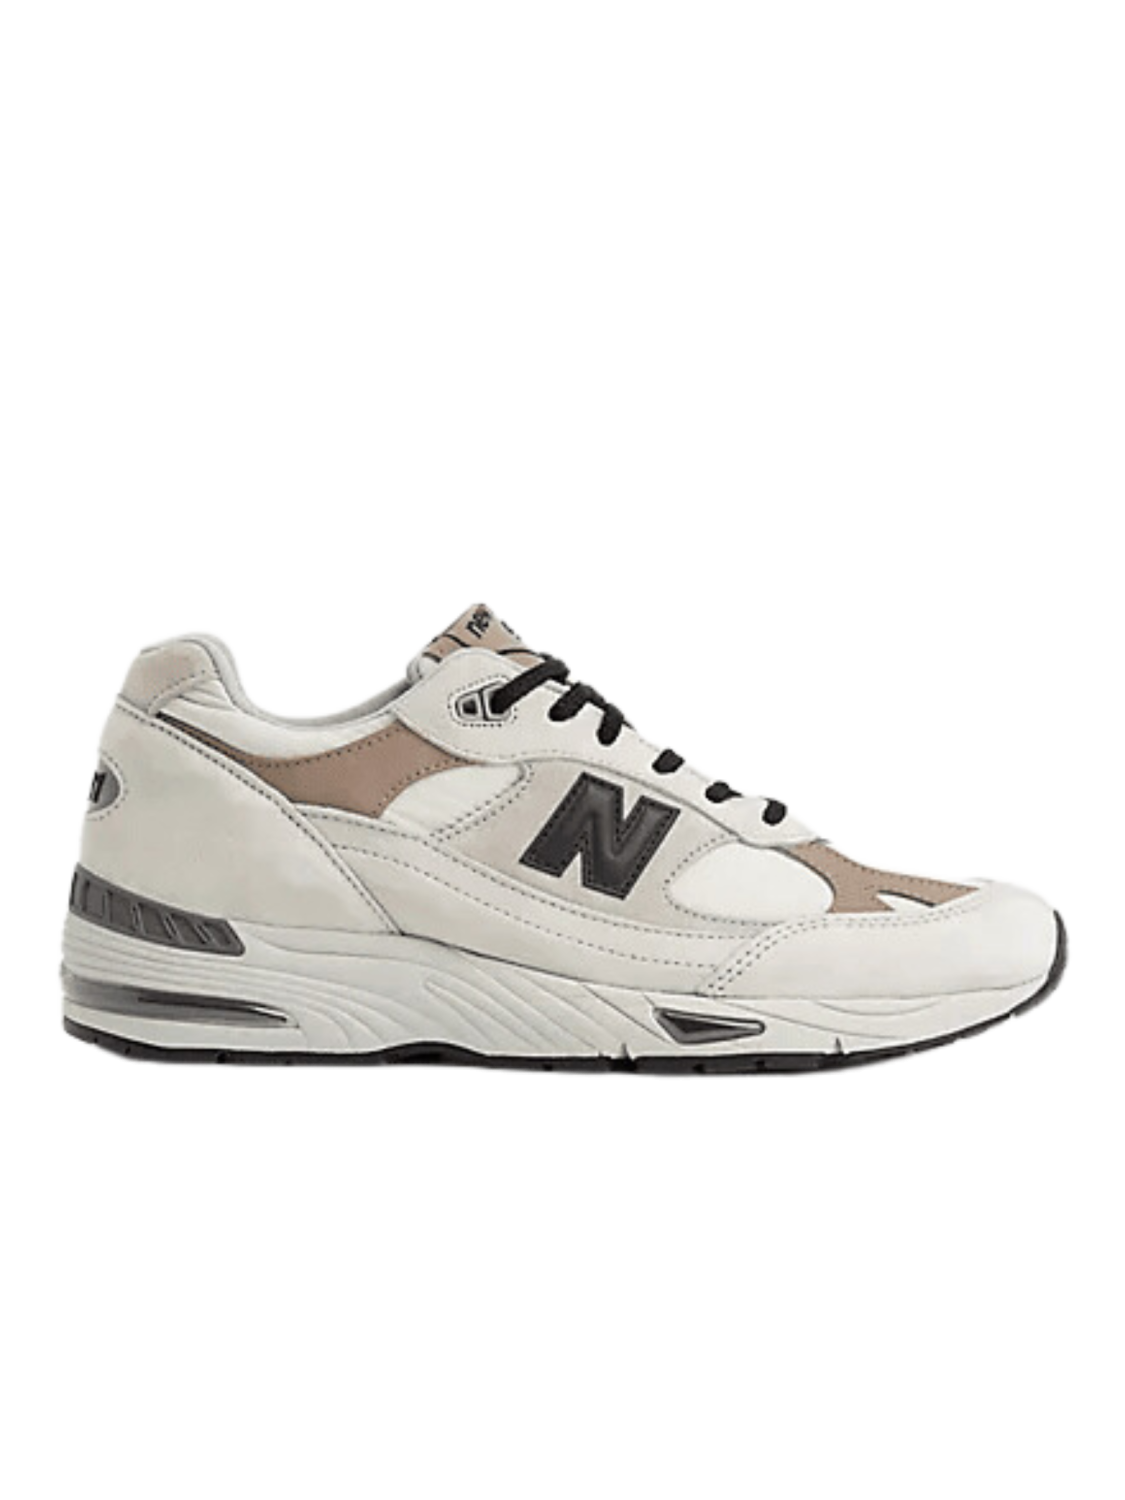 NEW BALANCE 991 MADE IN UK PELICAN